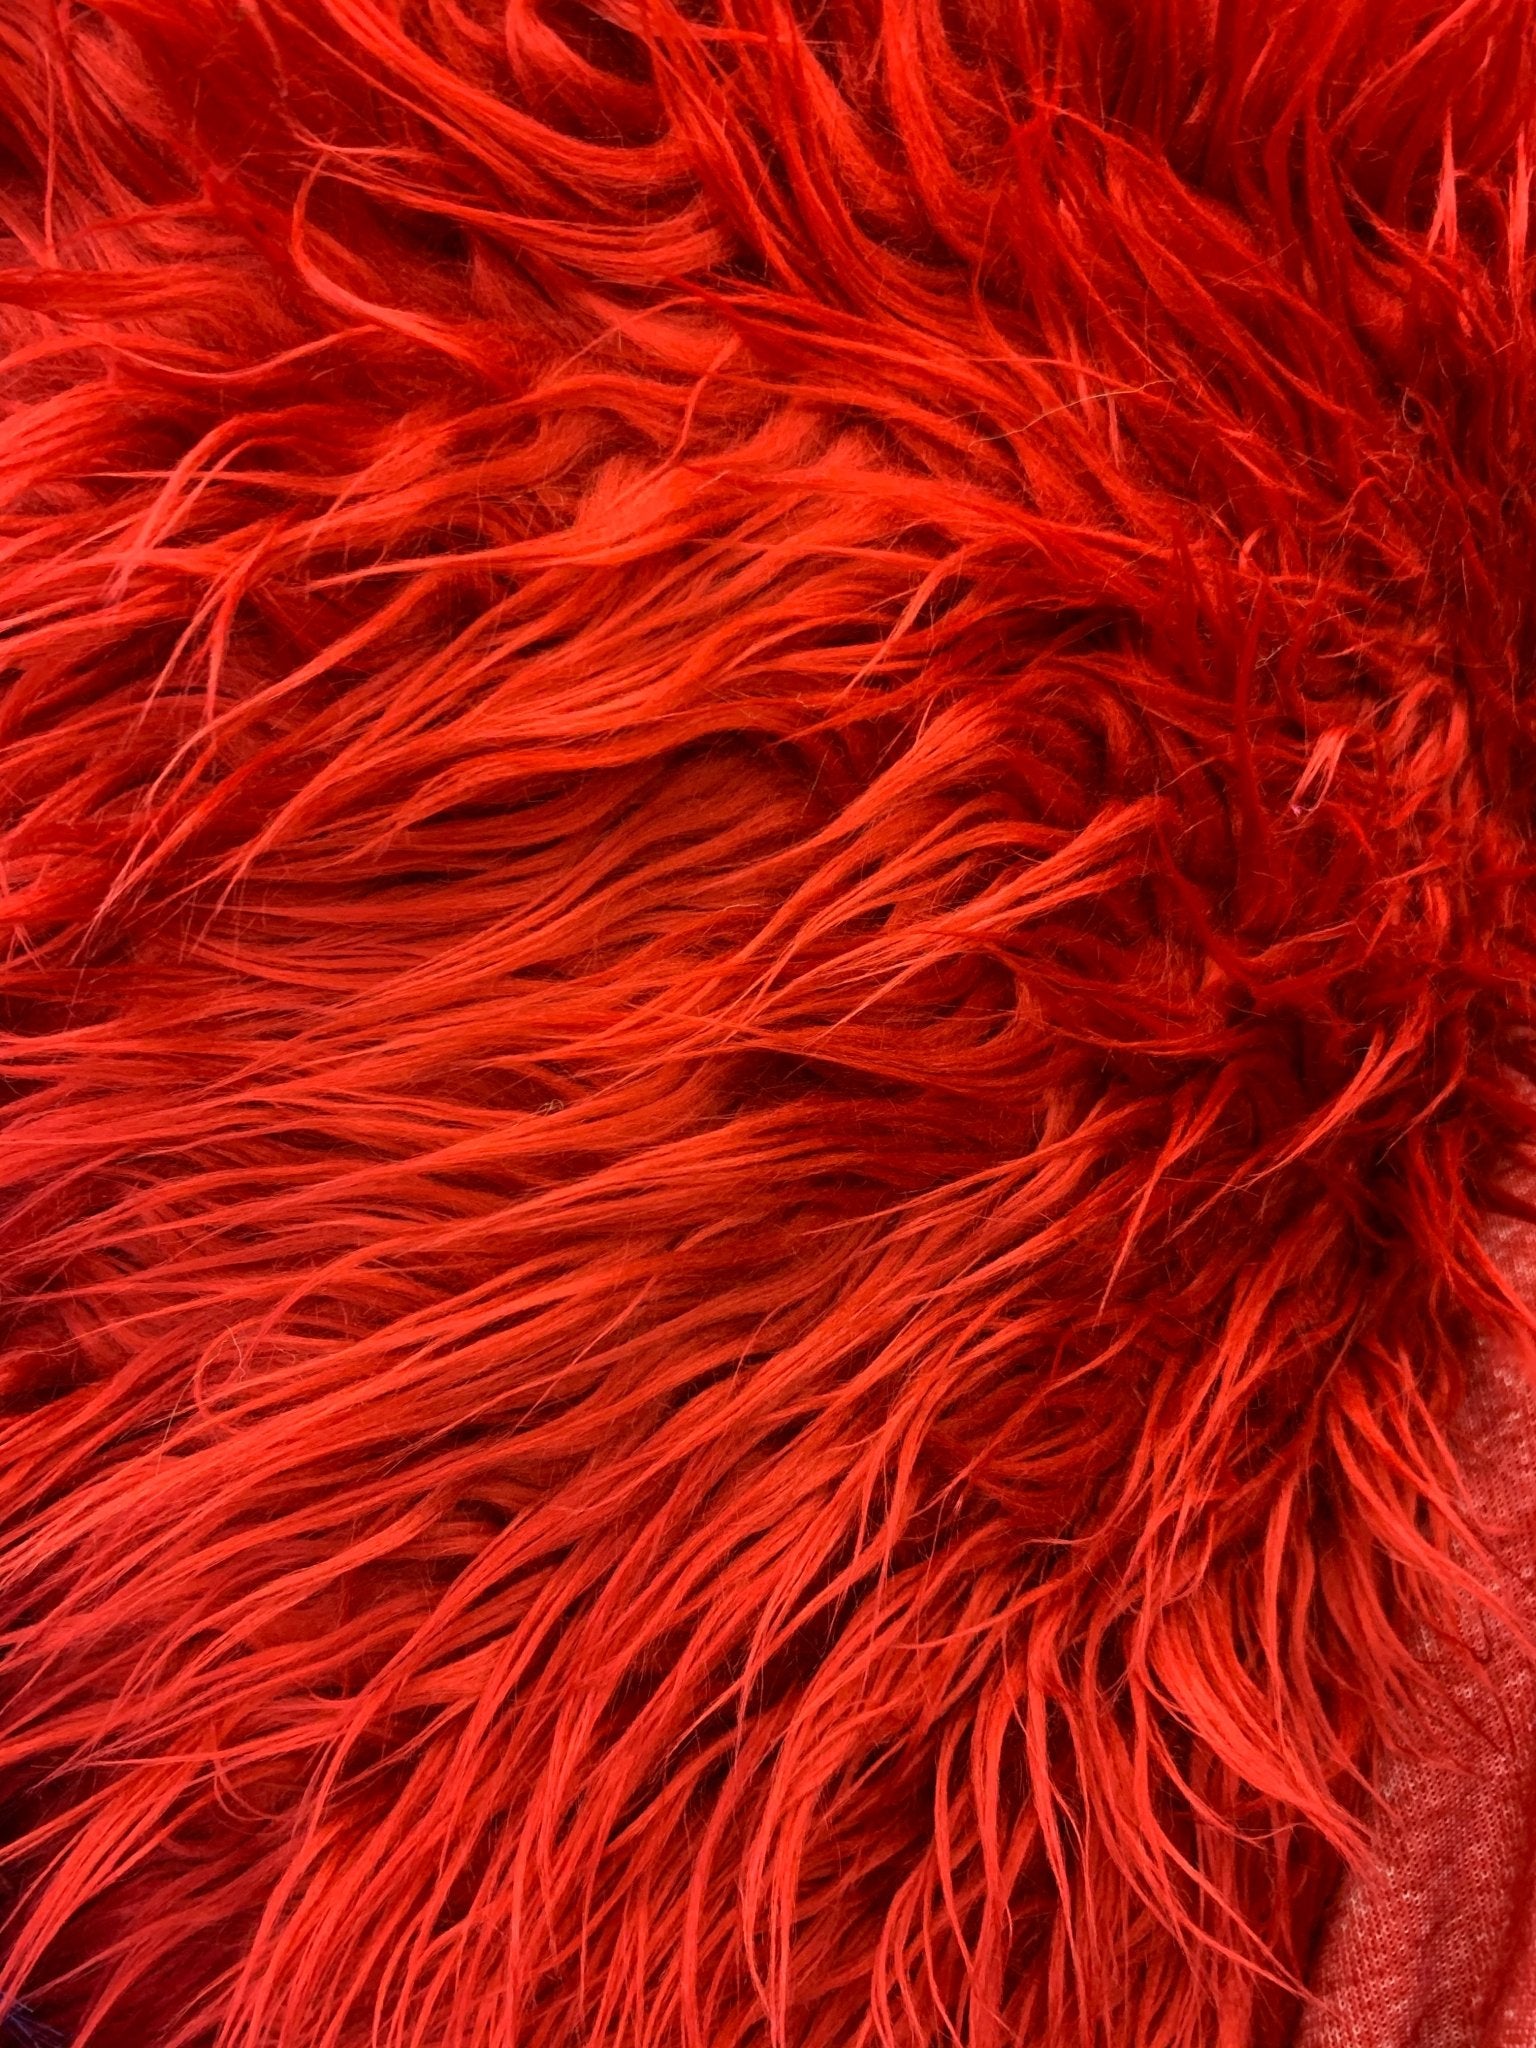 Mongolian Long Pile Fake Faux Fur Fabric Sold By The YardICEFABRICICE FABRICSRedBy The Yard (60 inches Wide)Mongolian Long Pile Fake Faux Fur Fabric Sold By The Yard ICEFABRIC